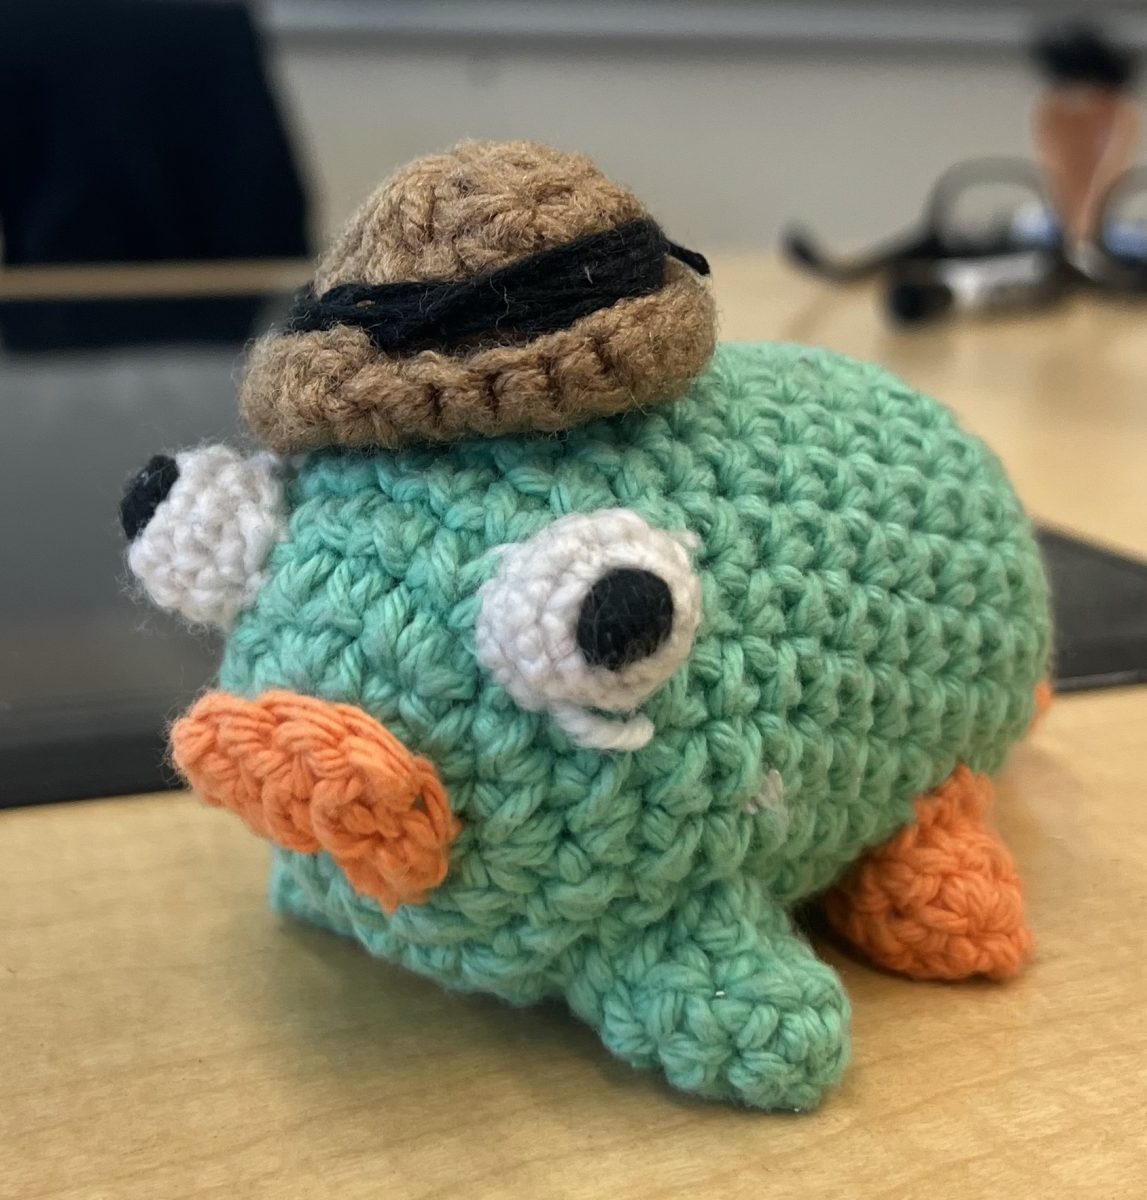 Here is a crocheted, stuffed toy of Perry the Platypus made by the daughter of Bronx Science math teacher Ms. Lerohl. Ms. Lerohl thoroughly enjoyed watching Phineas and Ferb with her kids when it first aired, and she now frequently discusses the show with her A.P. Calculus BC students.

